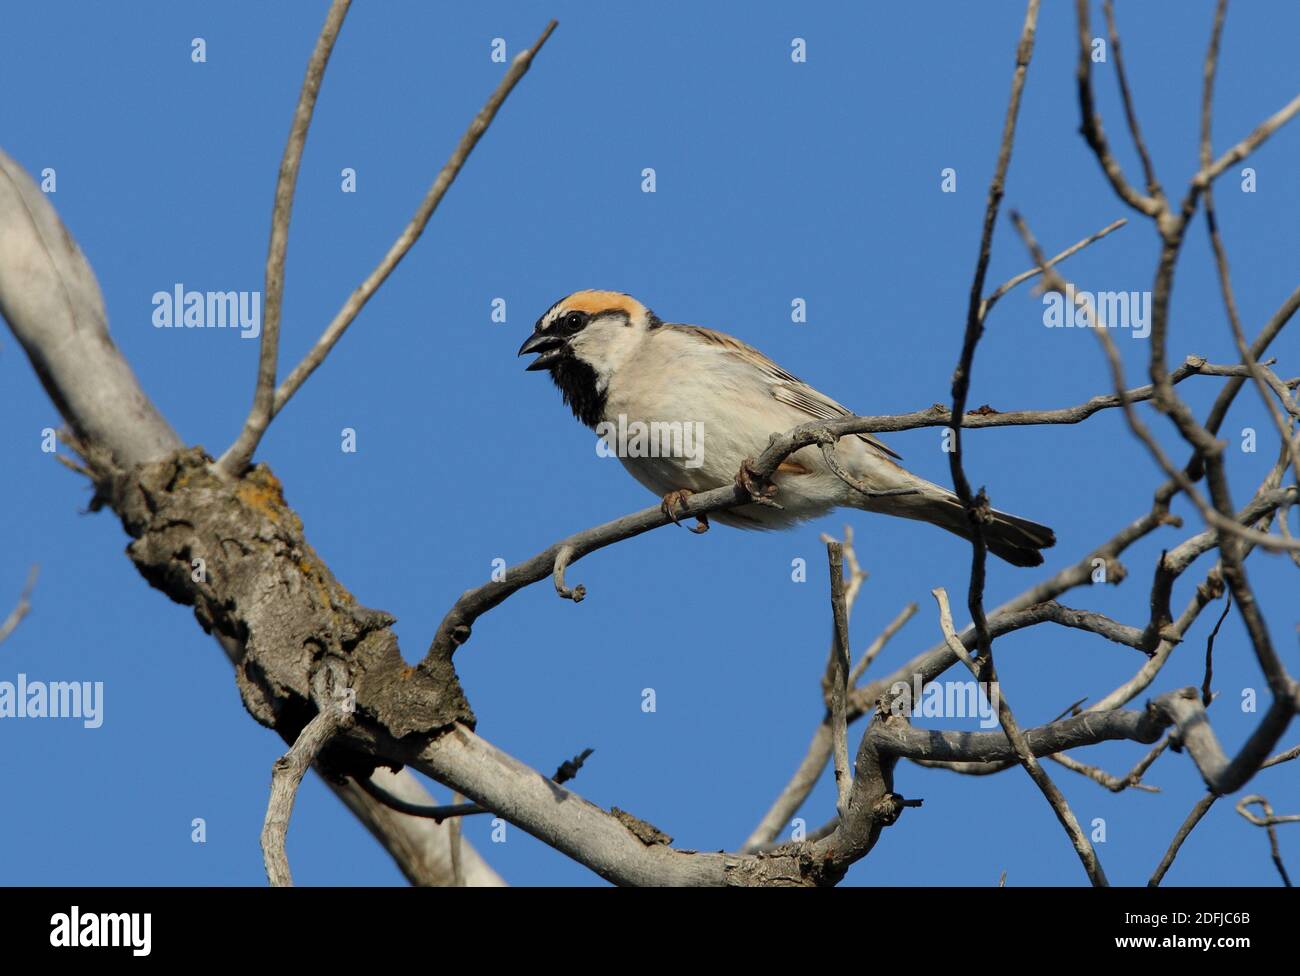 Saxaul Sparrow (Passer ammodendri nigricans) adult perched in tree, calling  Almaty province, Kazakhstan         June Stock Photo